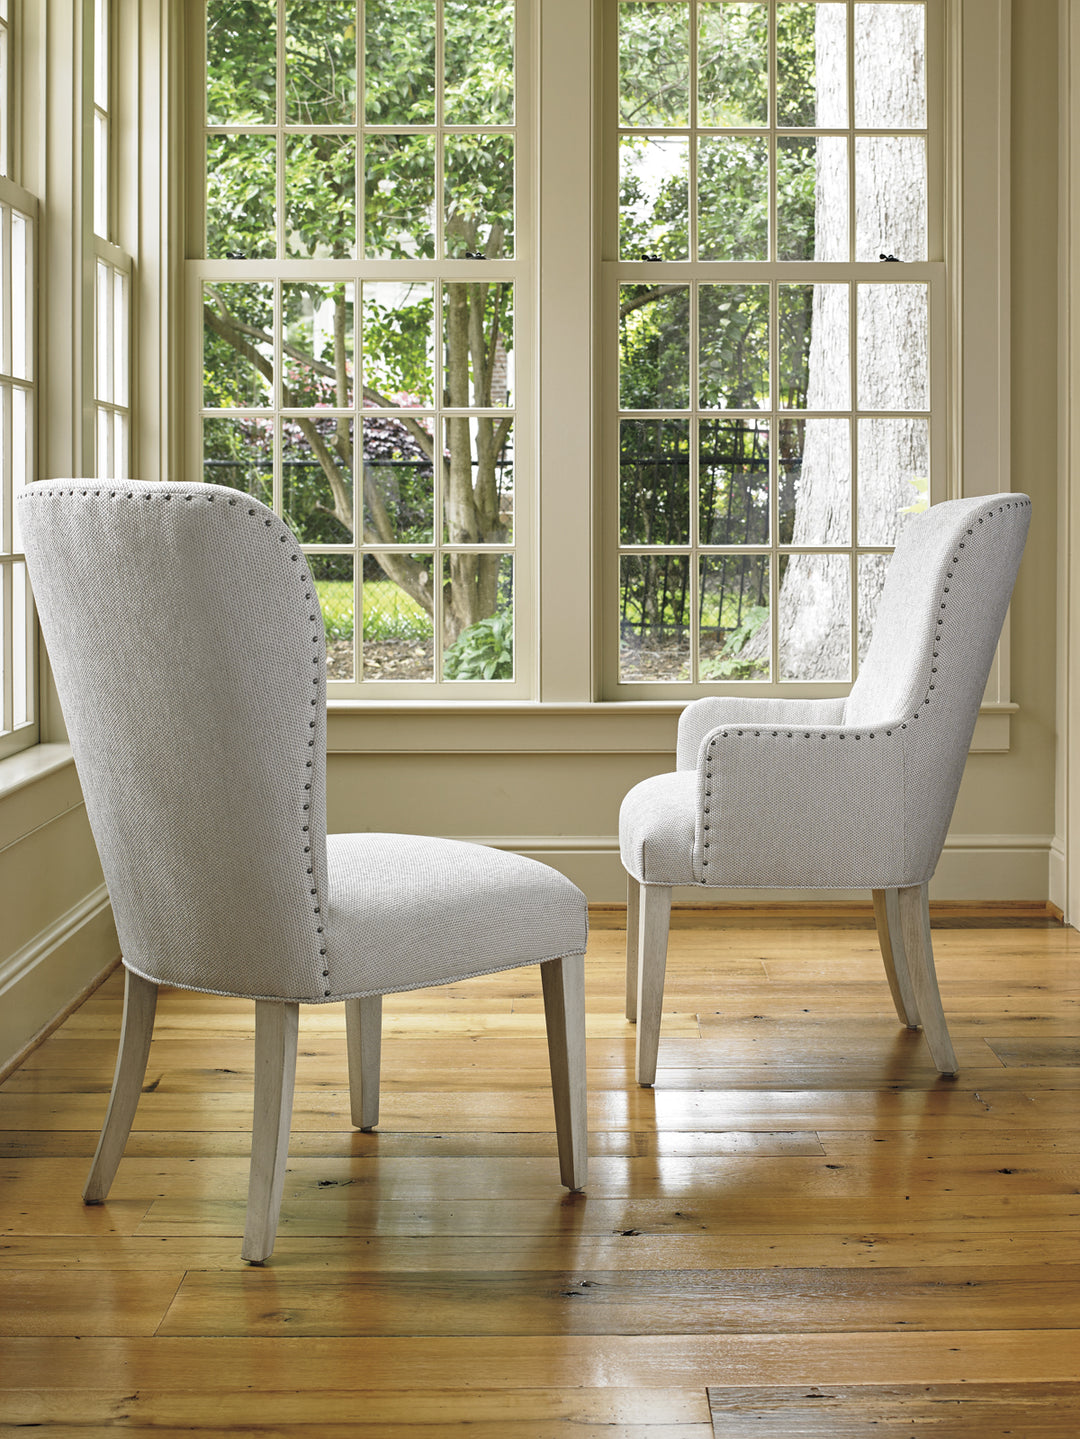 American Home Furniture | Lexington  - Oyster Bay Baxter Upholstered Arm Chair